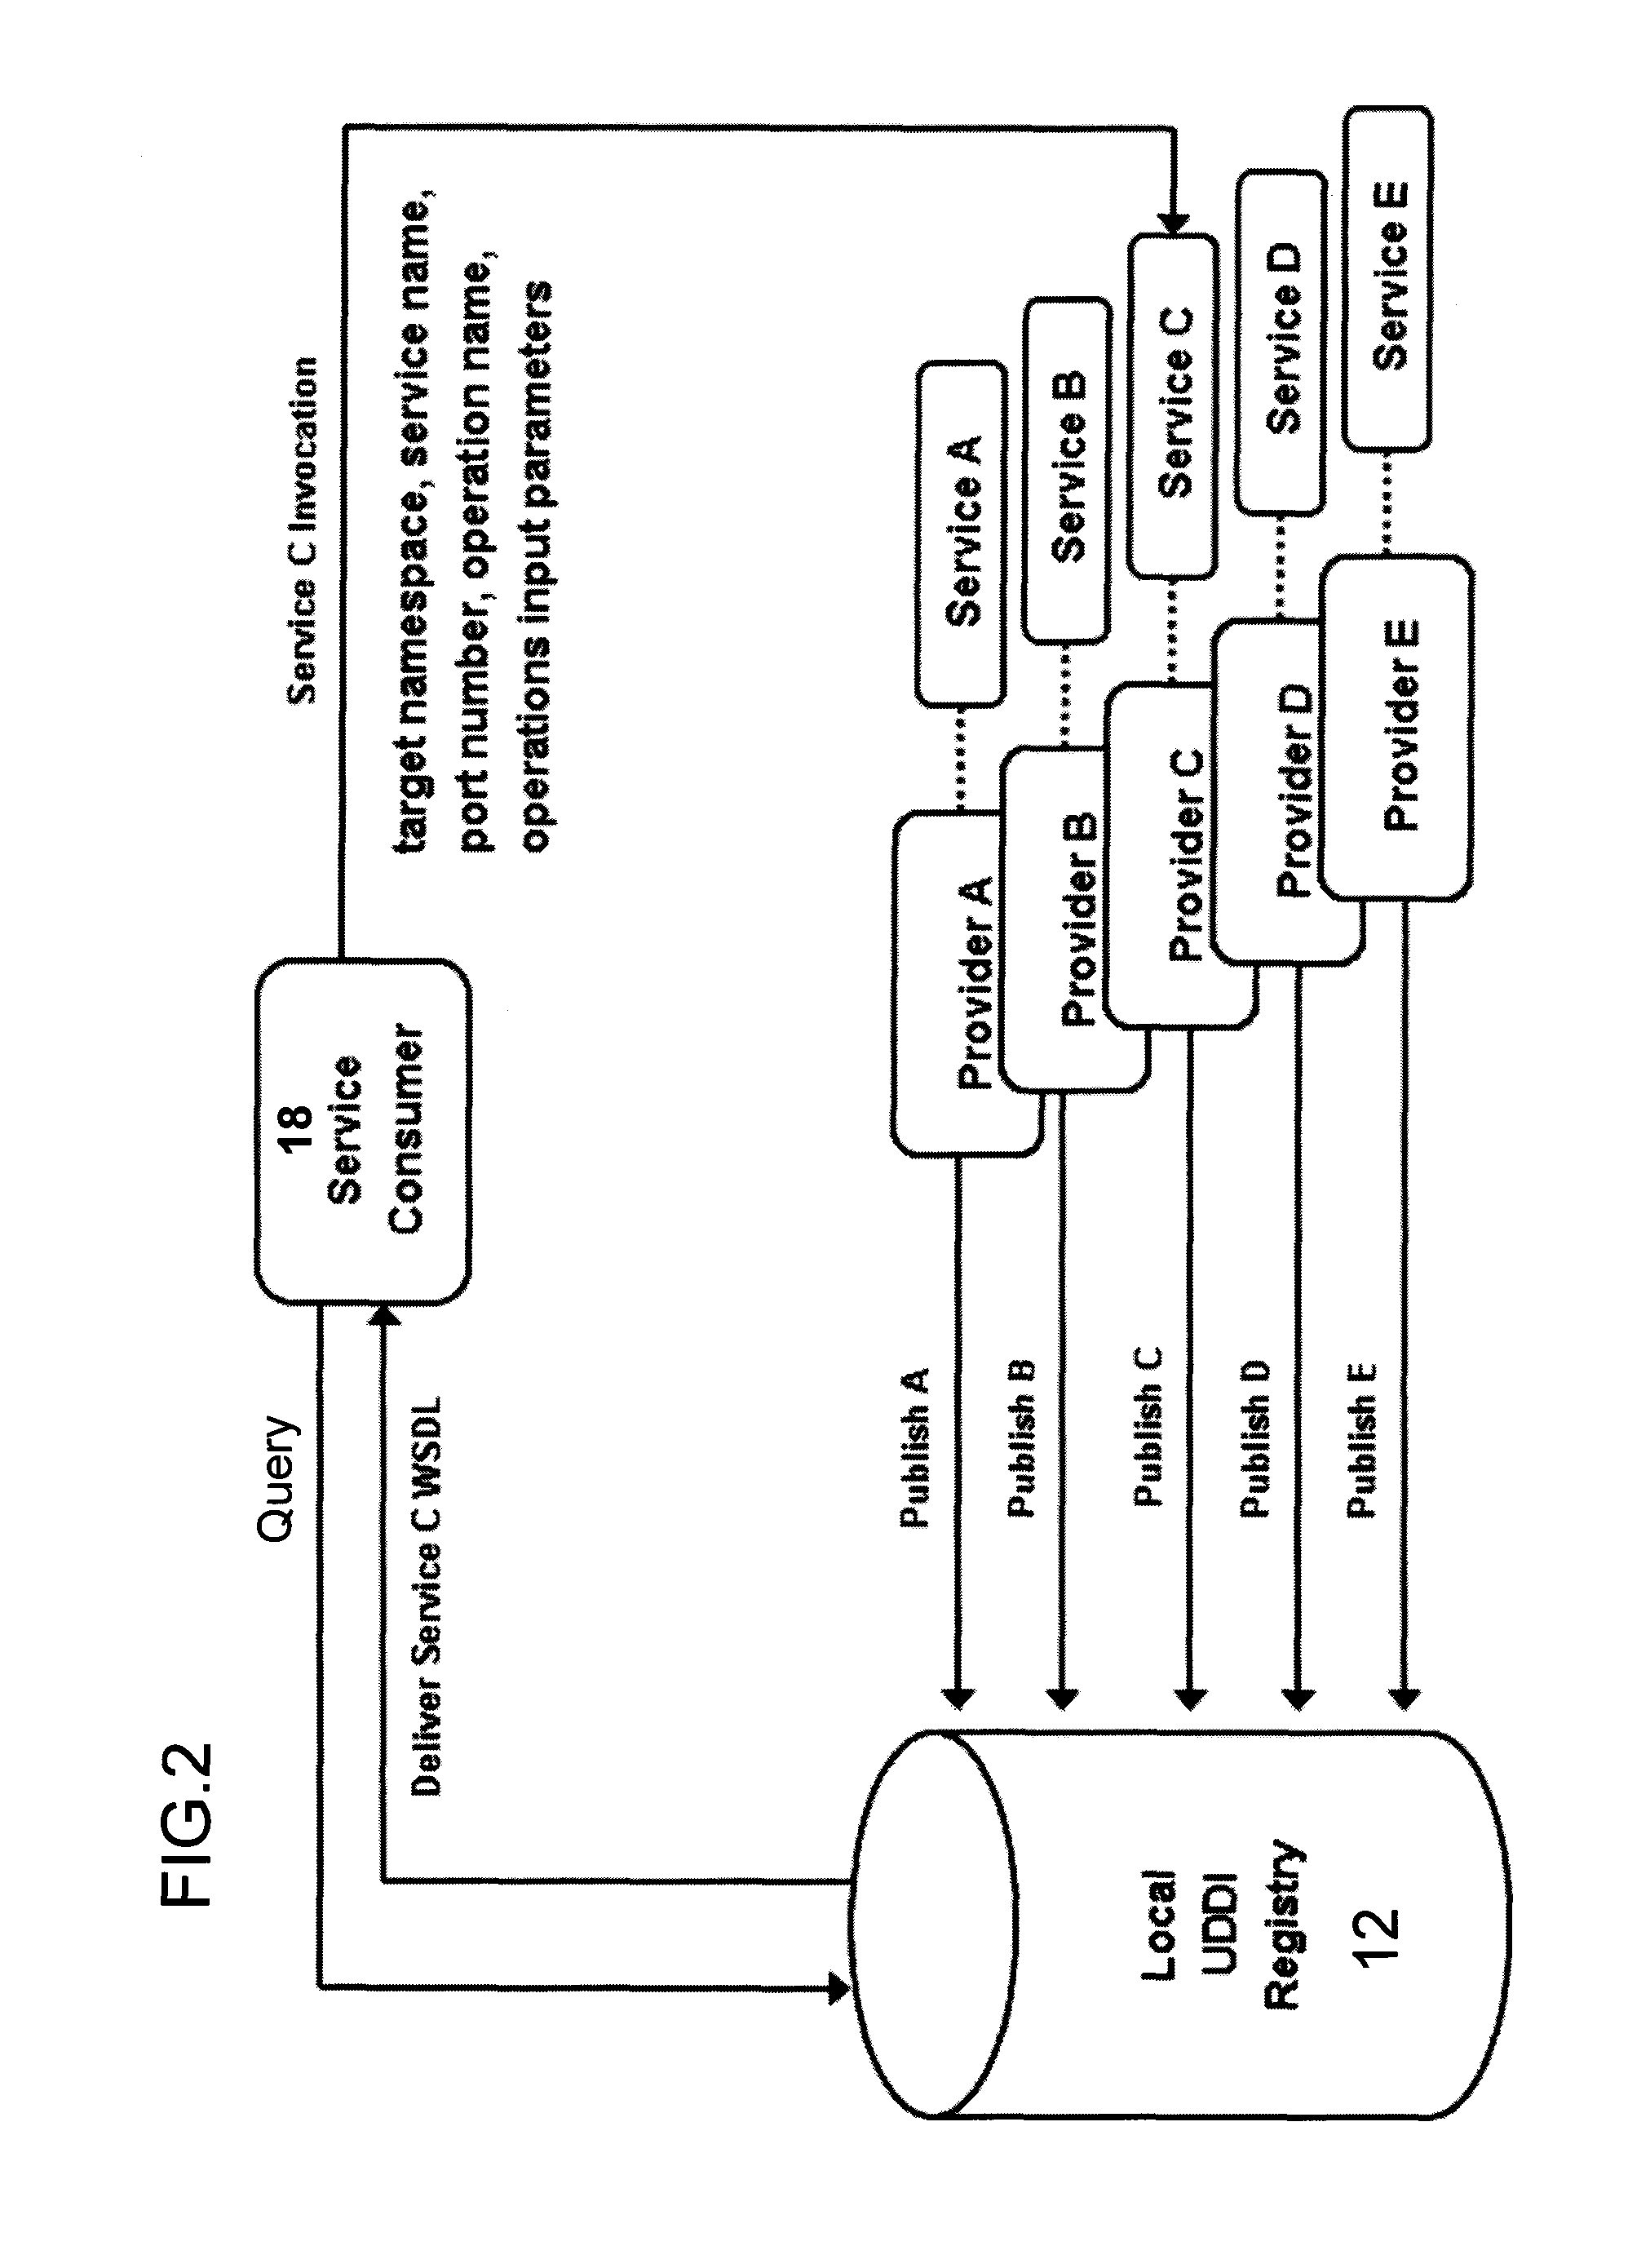 Apparatus and method for dynamic web service discovery